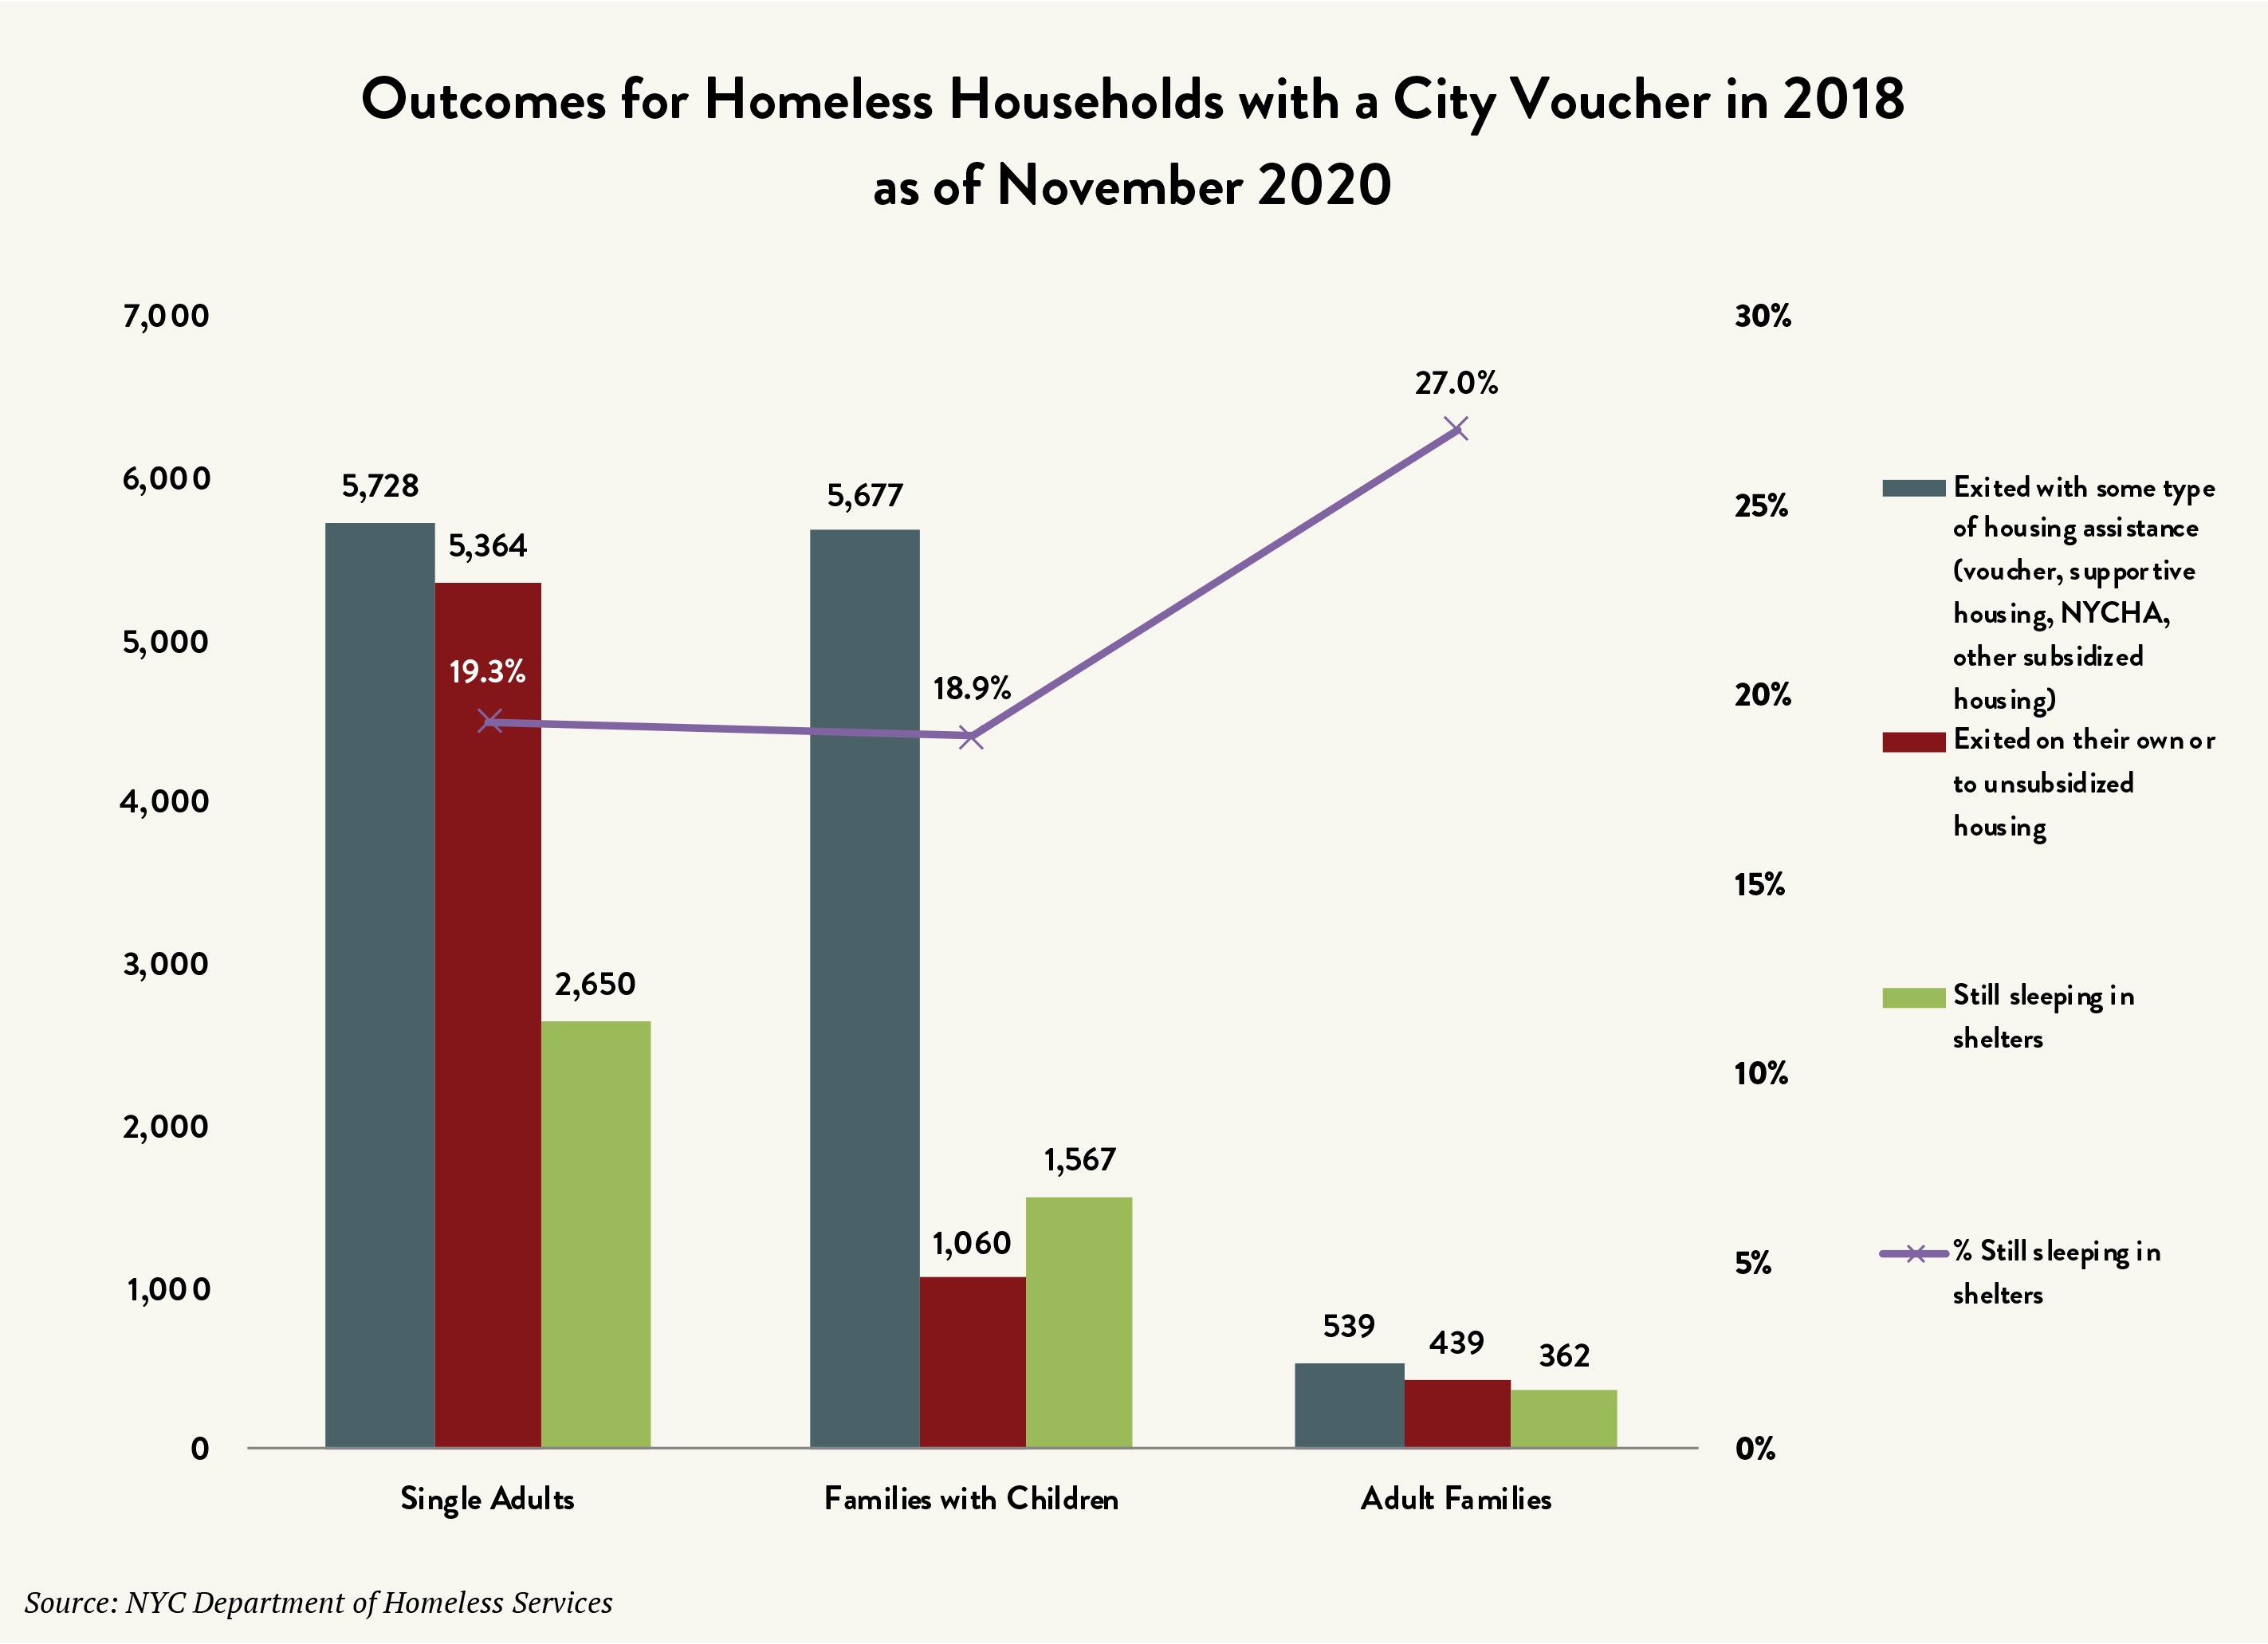 A graph labeled “Outcomes for Homeless Households with a City Voucher in 2018 as of November 2020.” The vertical axes list numbers 0 to 7,000 in increments of 1,000 on the left, and percentages from 0% to 30% in increments of 5 on the right. The horizontal axis lists three categories: single adults, families with children, and adult families. For each there are three bars: A gray bar shows the number of households who exited with some type of housing assistance, a dark red bar shows the number of households who exited on their own or to unsubsidized housing, and a green bar shows the number of households who are still sleeping in shelters. A purple line marks the percent still sleeping in shelters for each category, with values ranging from 18.9% to 27%.